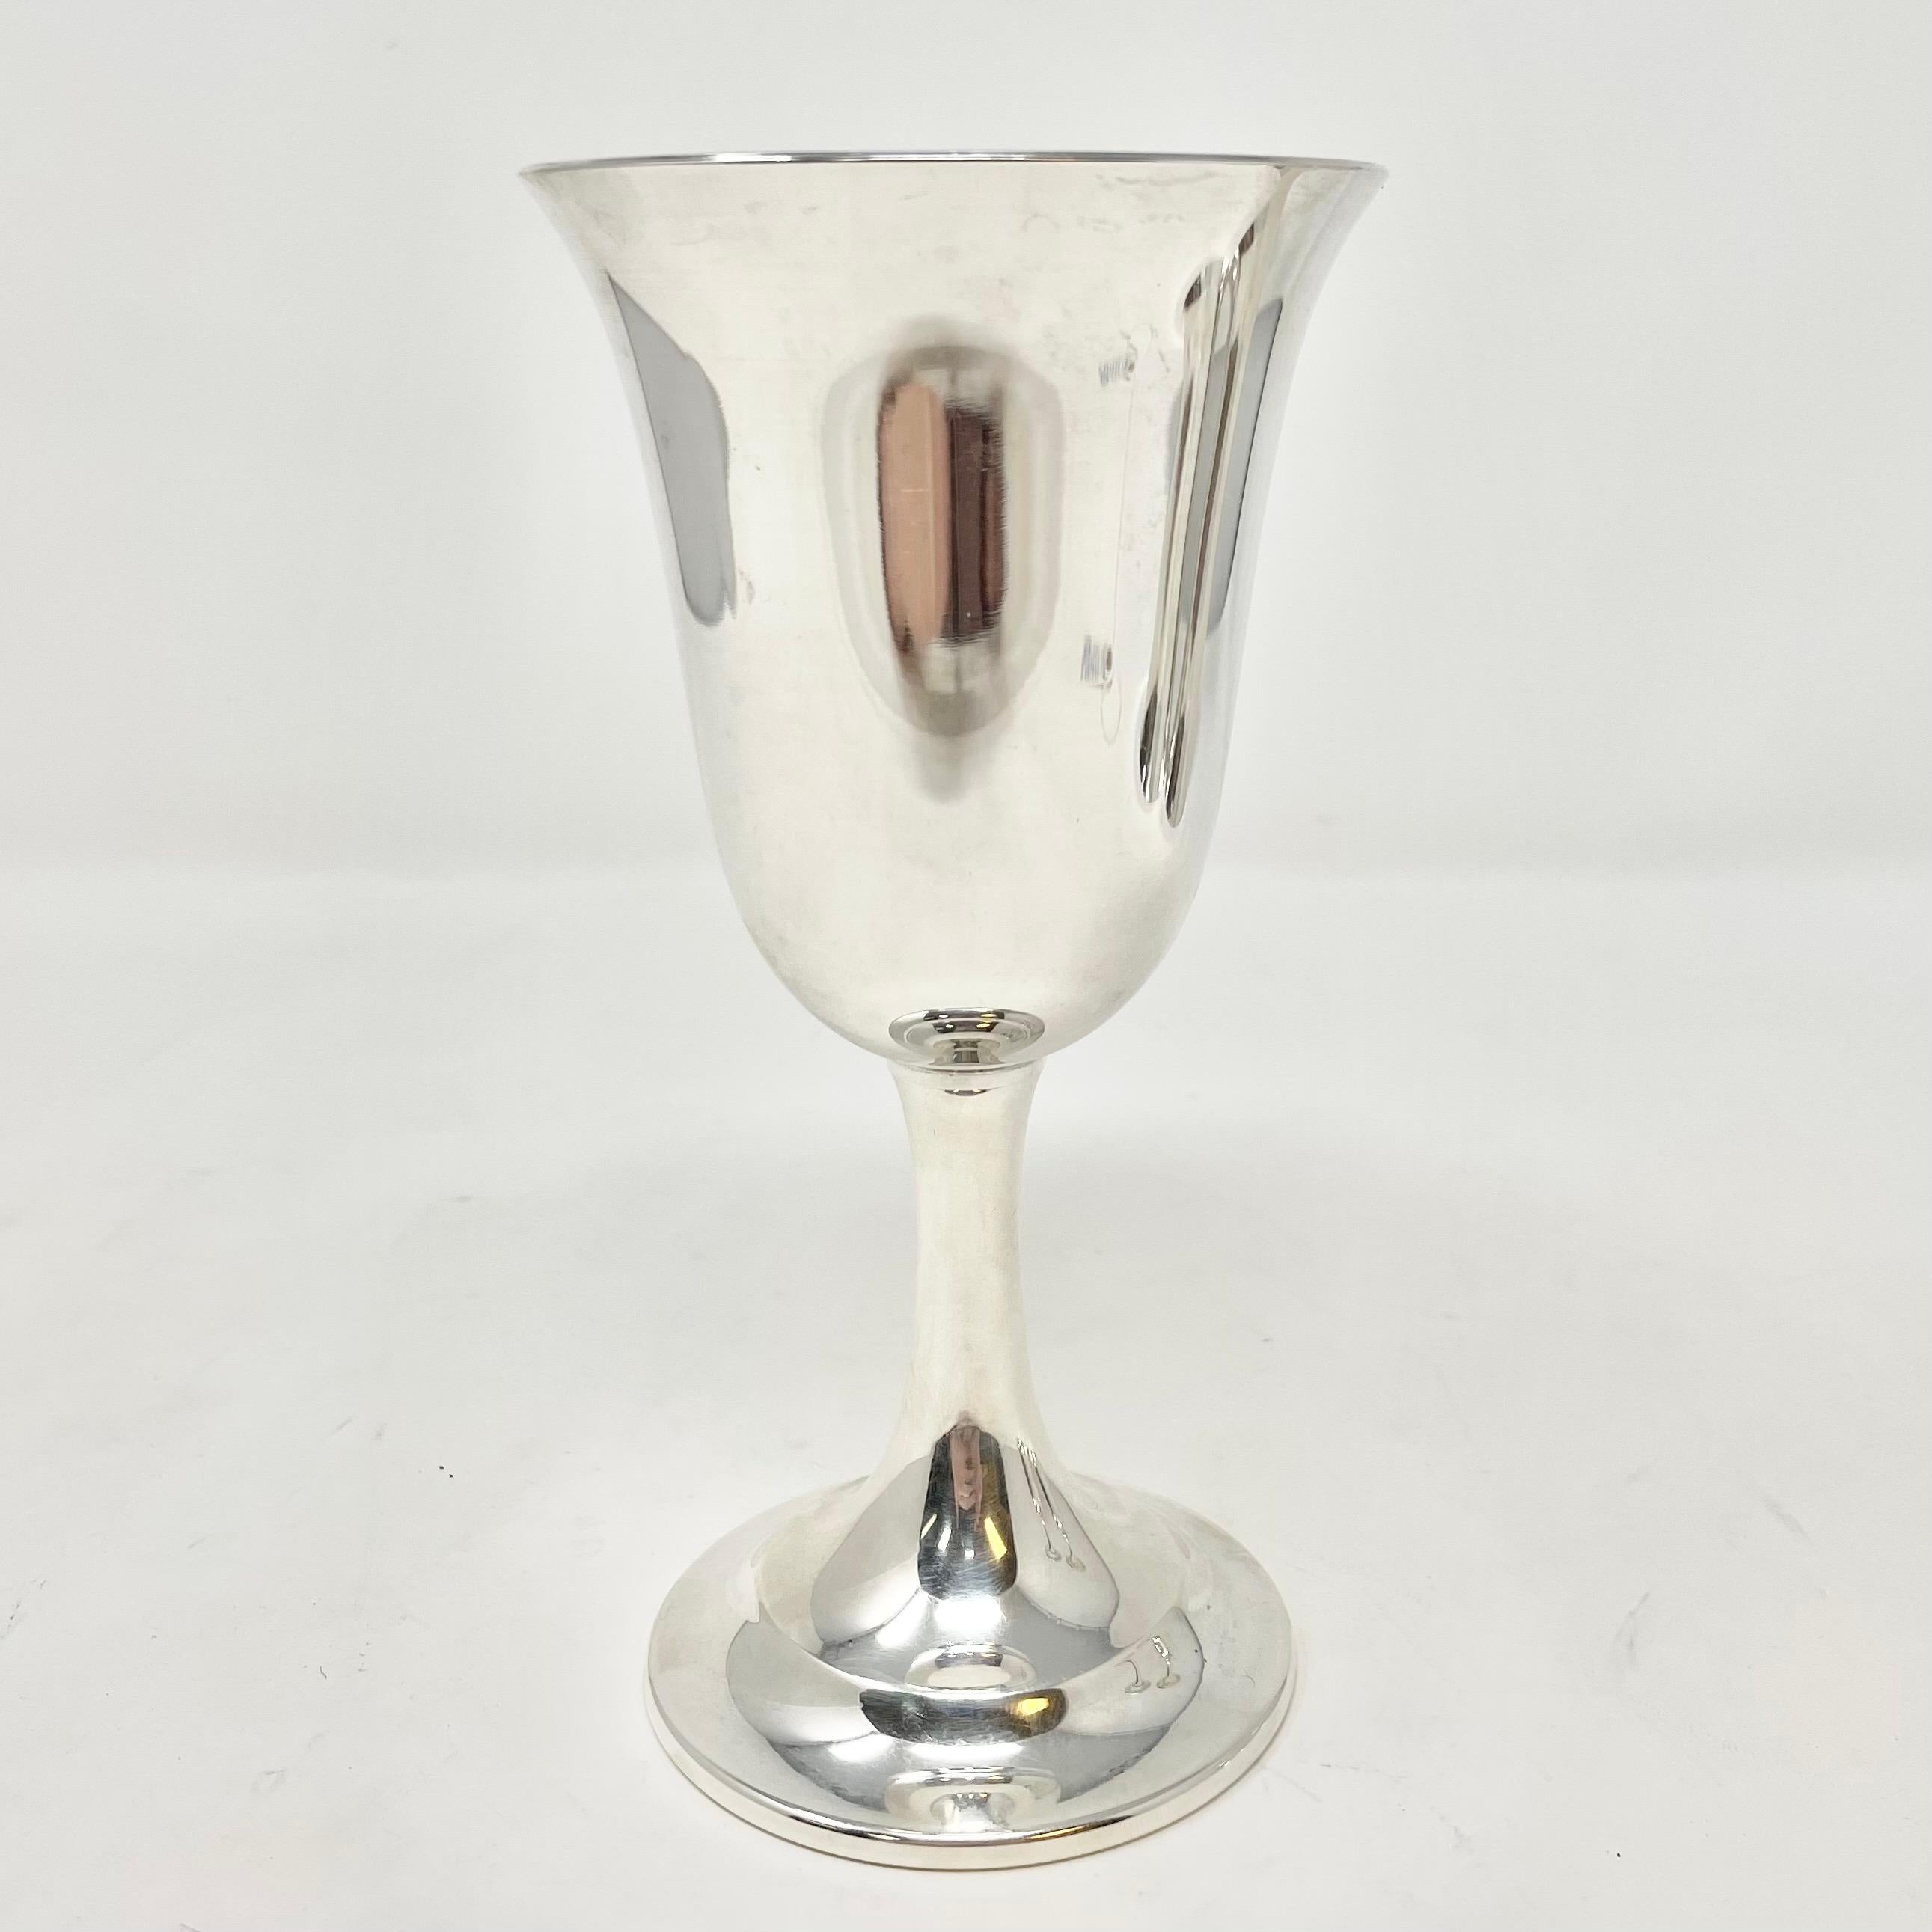 Harlequin Set of 12 Estate American sterling silver wine/water goblets, Circa 1920-1940. 
All American Early 20th century Harlequin Set includes 8 Pieces Made by 